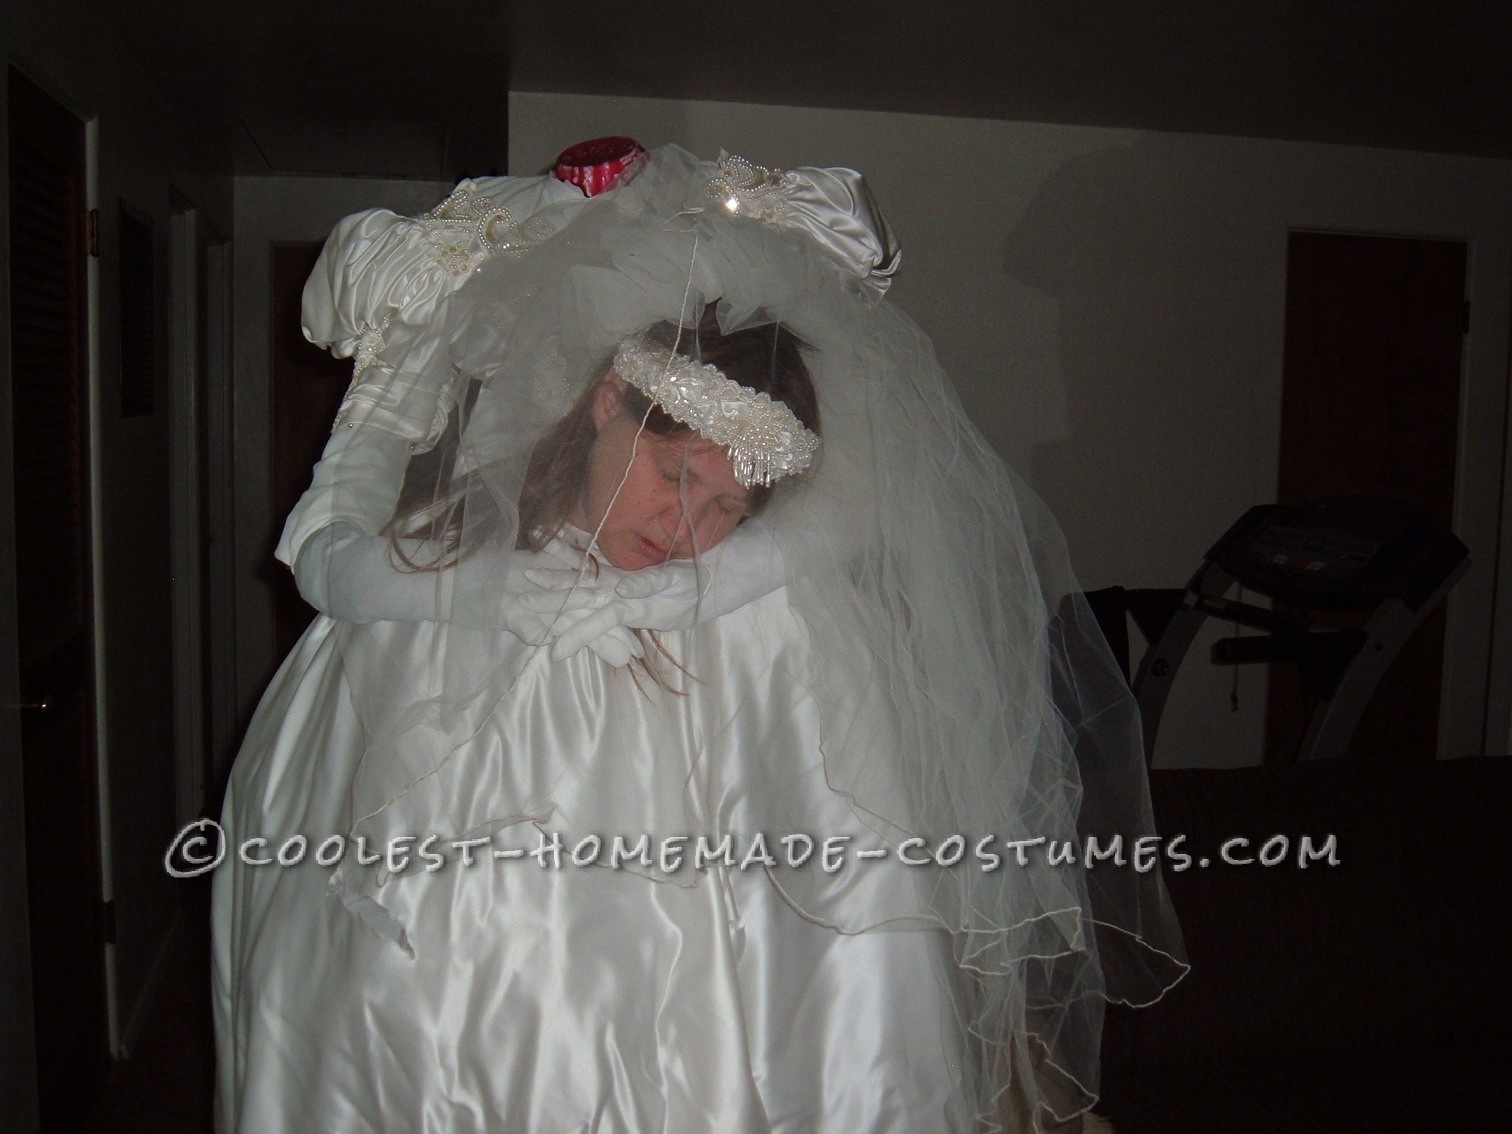 This particular costume was inspired by an old wedding dress found in a vacated rental property. 
I borrowed a backpack and some tentpoles from